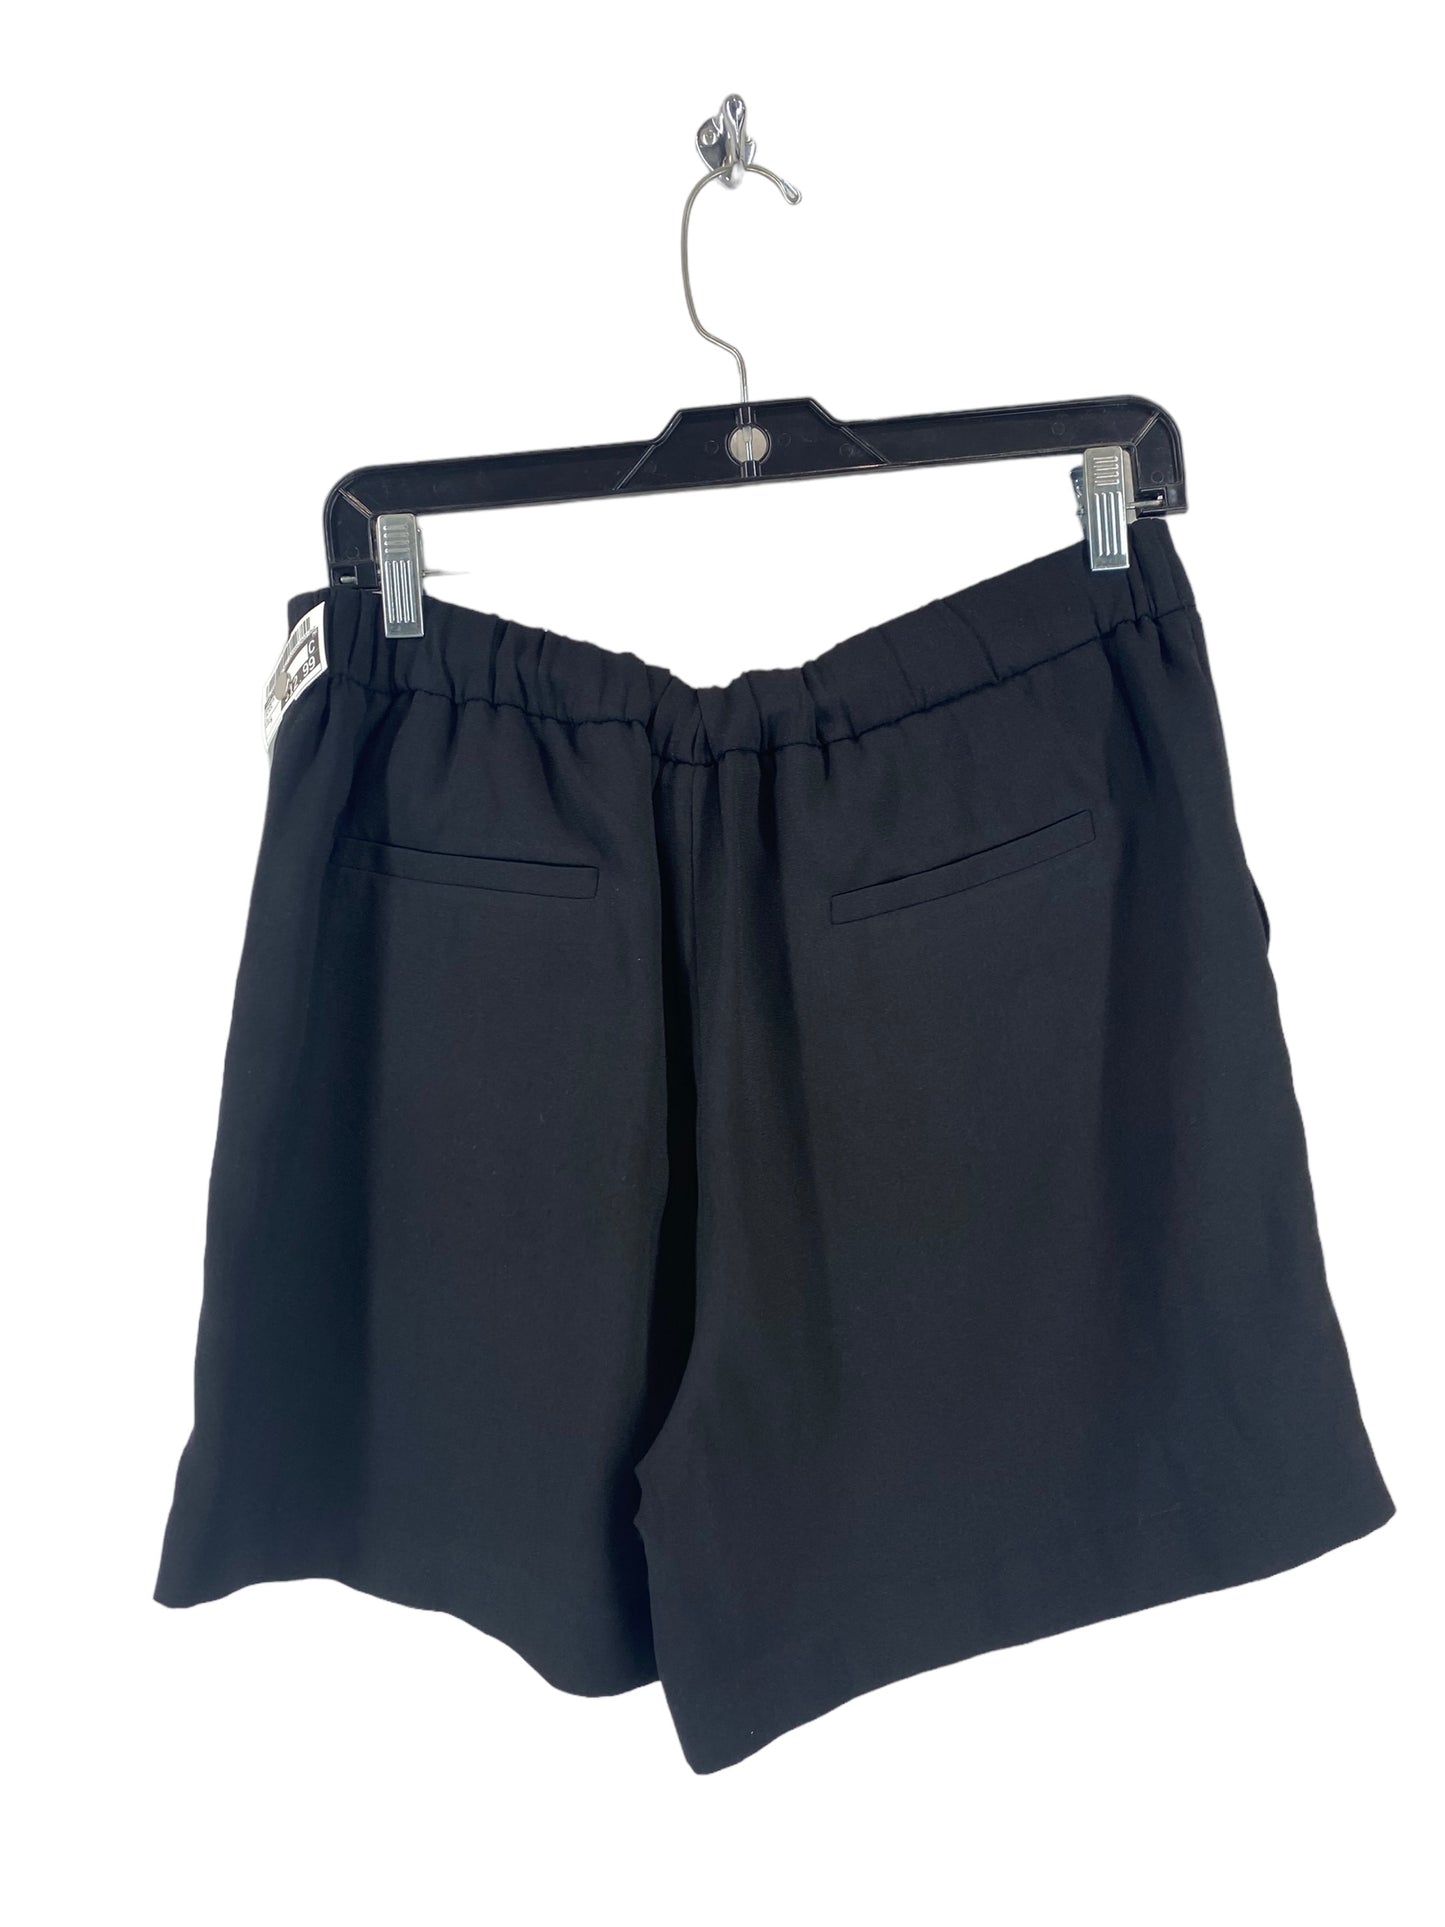 Shorts By Halogen  Size: S